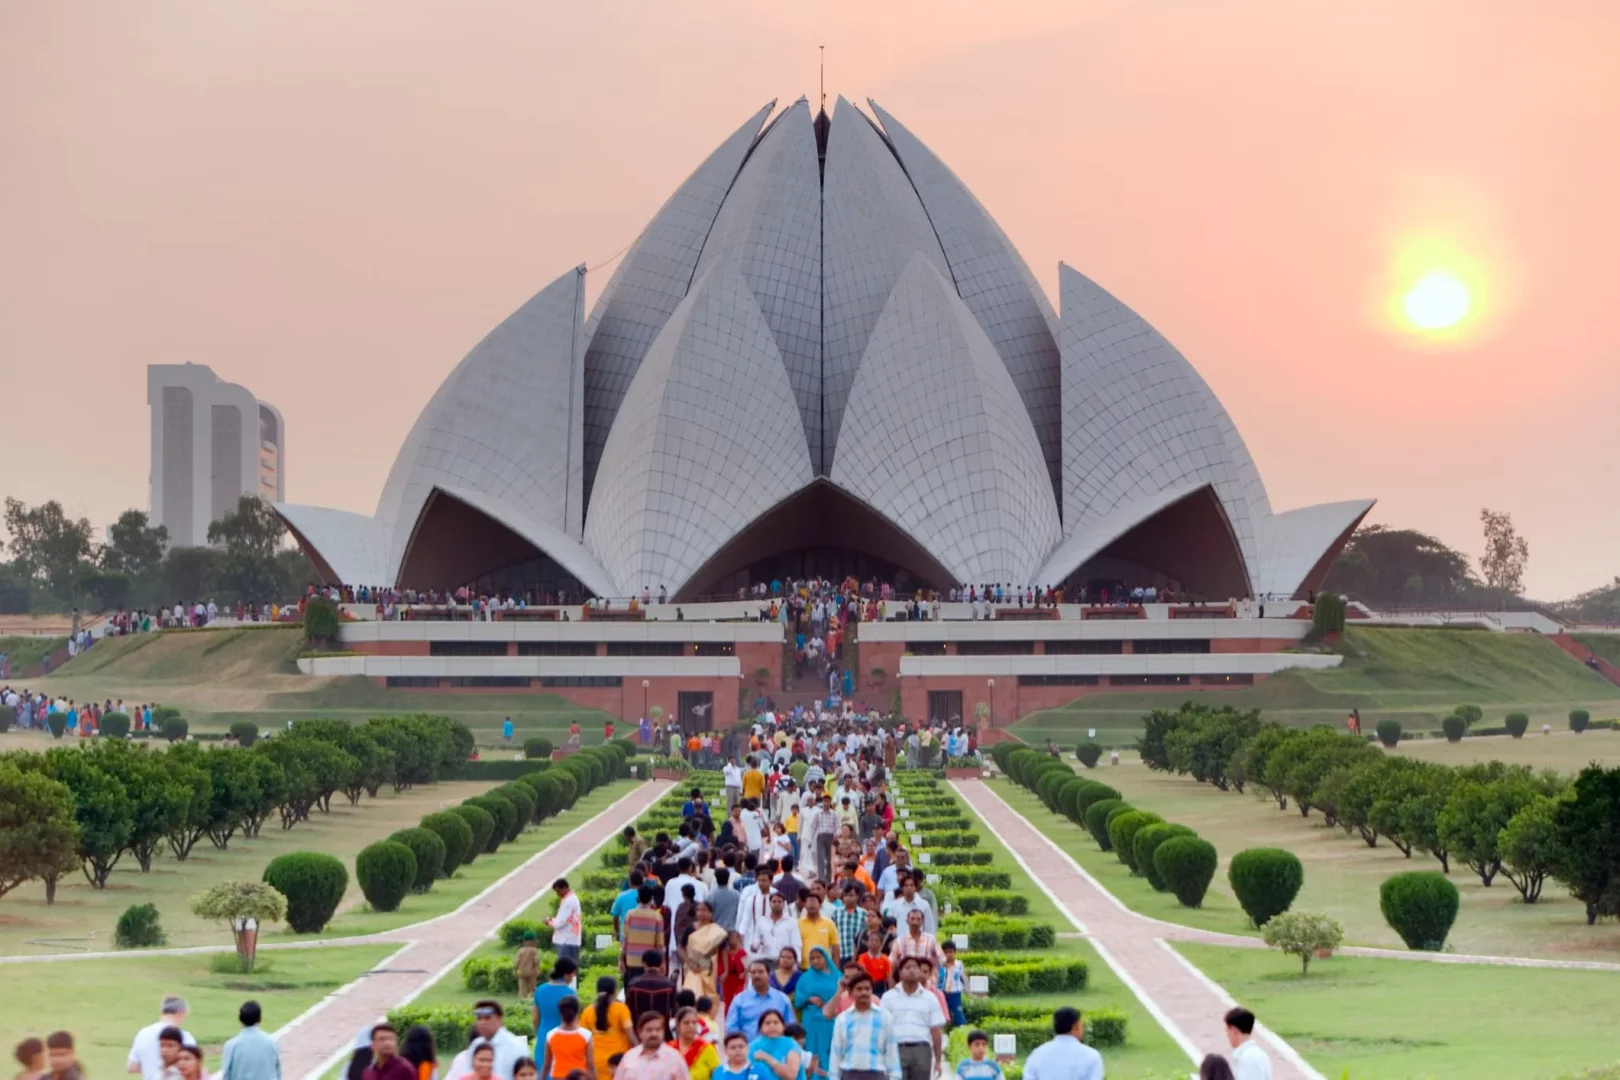 The Lotus Temple in Delhi is an architectural marvel that transcends religious boundaries. Designed in the shape of a lotus flower, it is a Bahá'í House of Worship known for its stunning lotus-shaped dome and serene ambiance. The temple promotes unity, peace, and the idea that all religions lead to one divine truth.